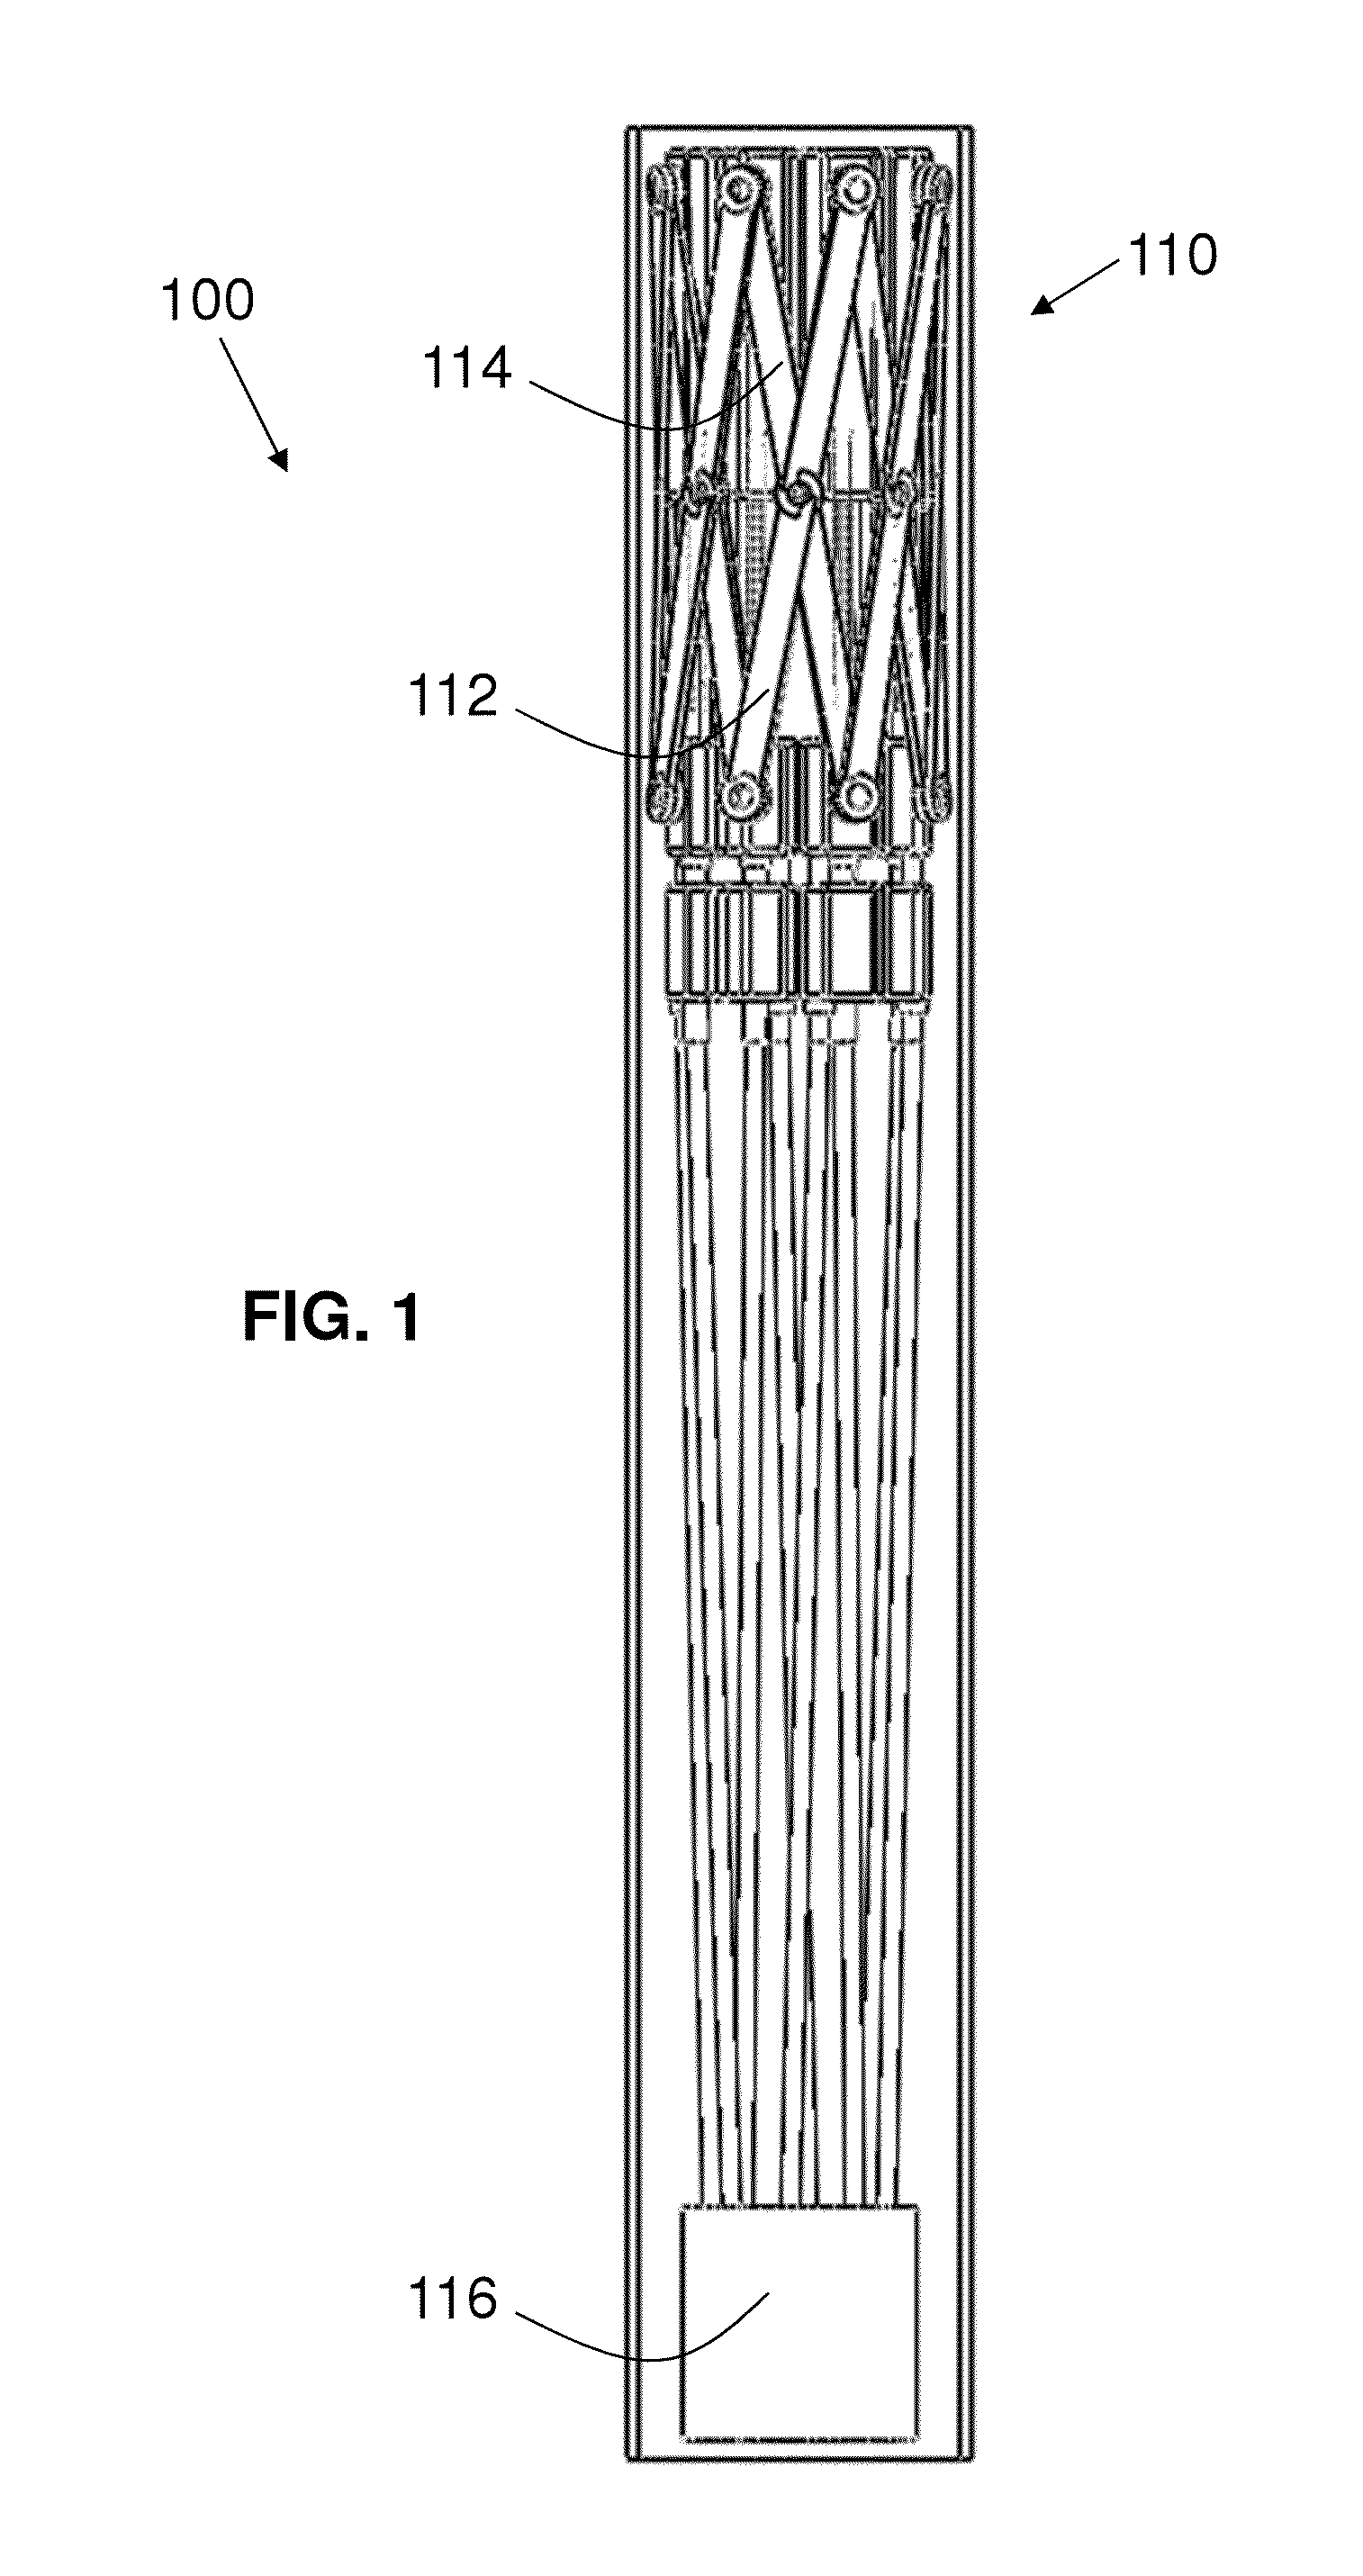 Actively Controllable Stent, Stent Graft, Heart Valve and Method of Controlling Same